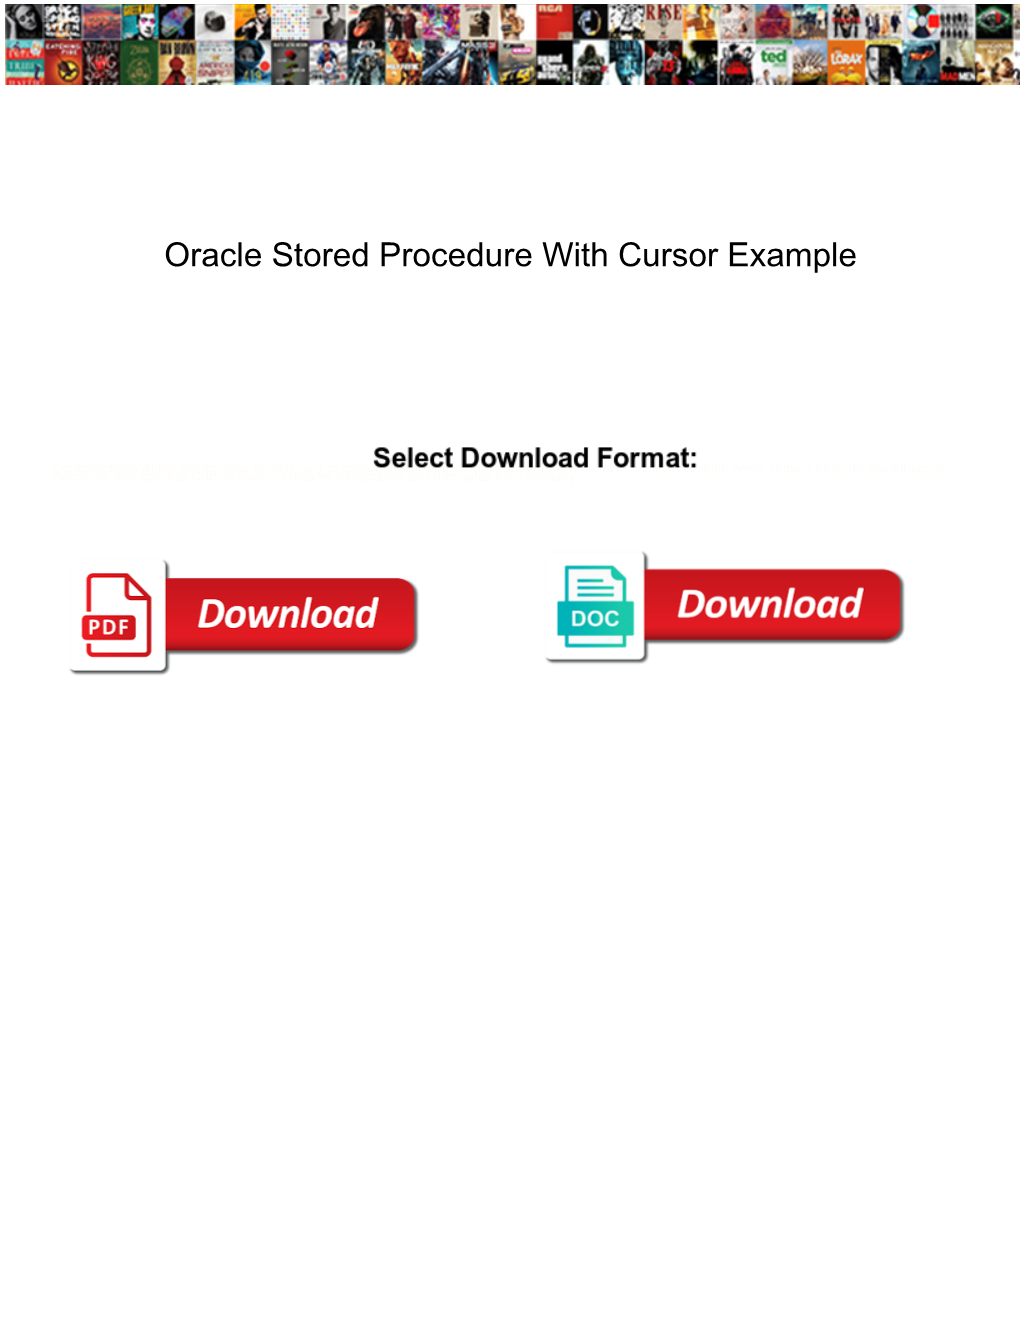 Oracle Stored Procedure with Cursor Example